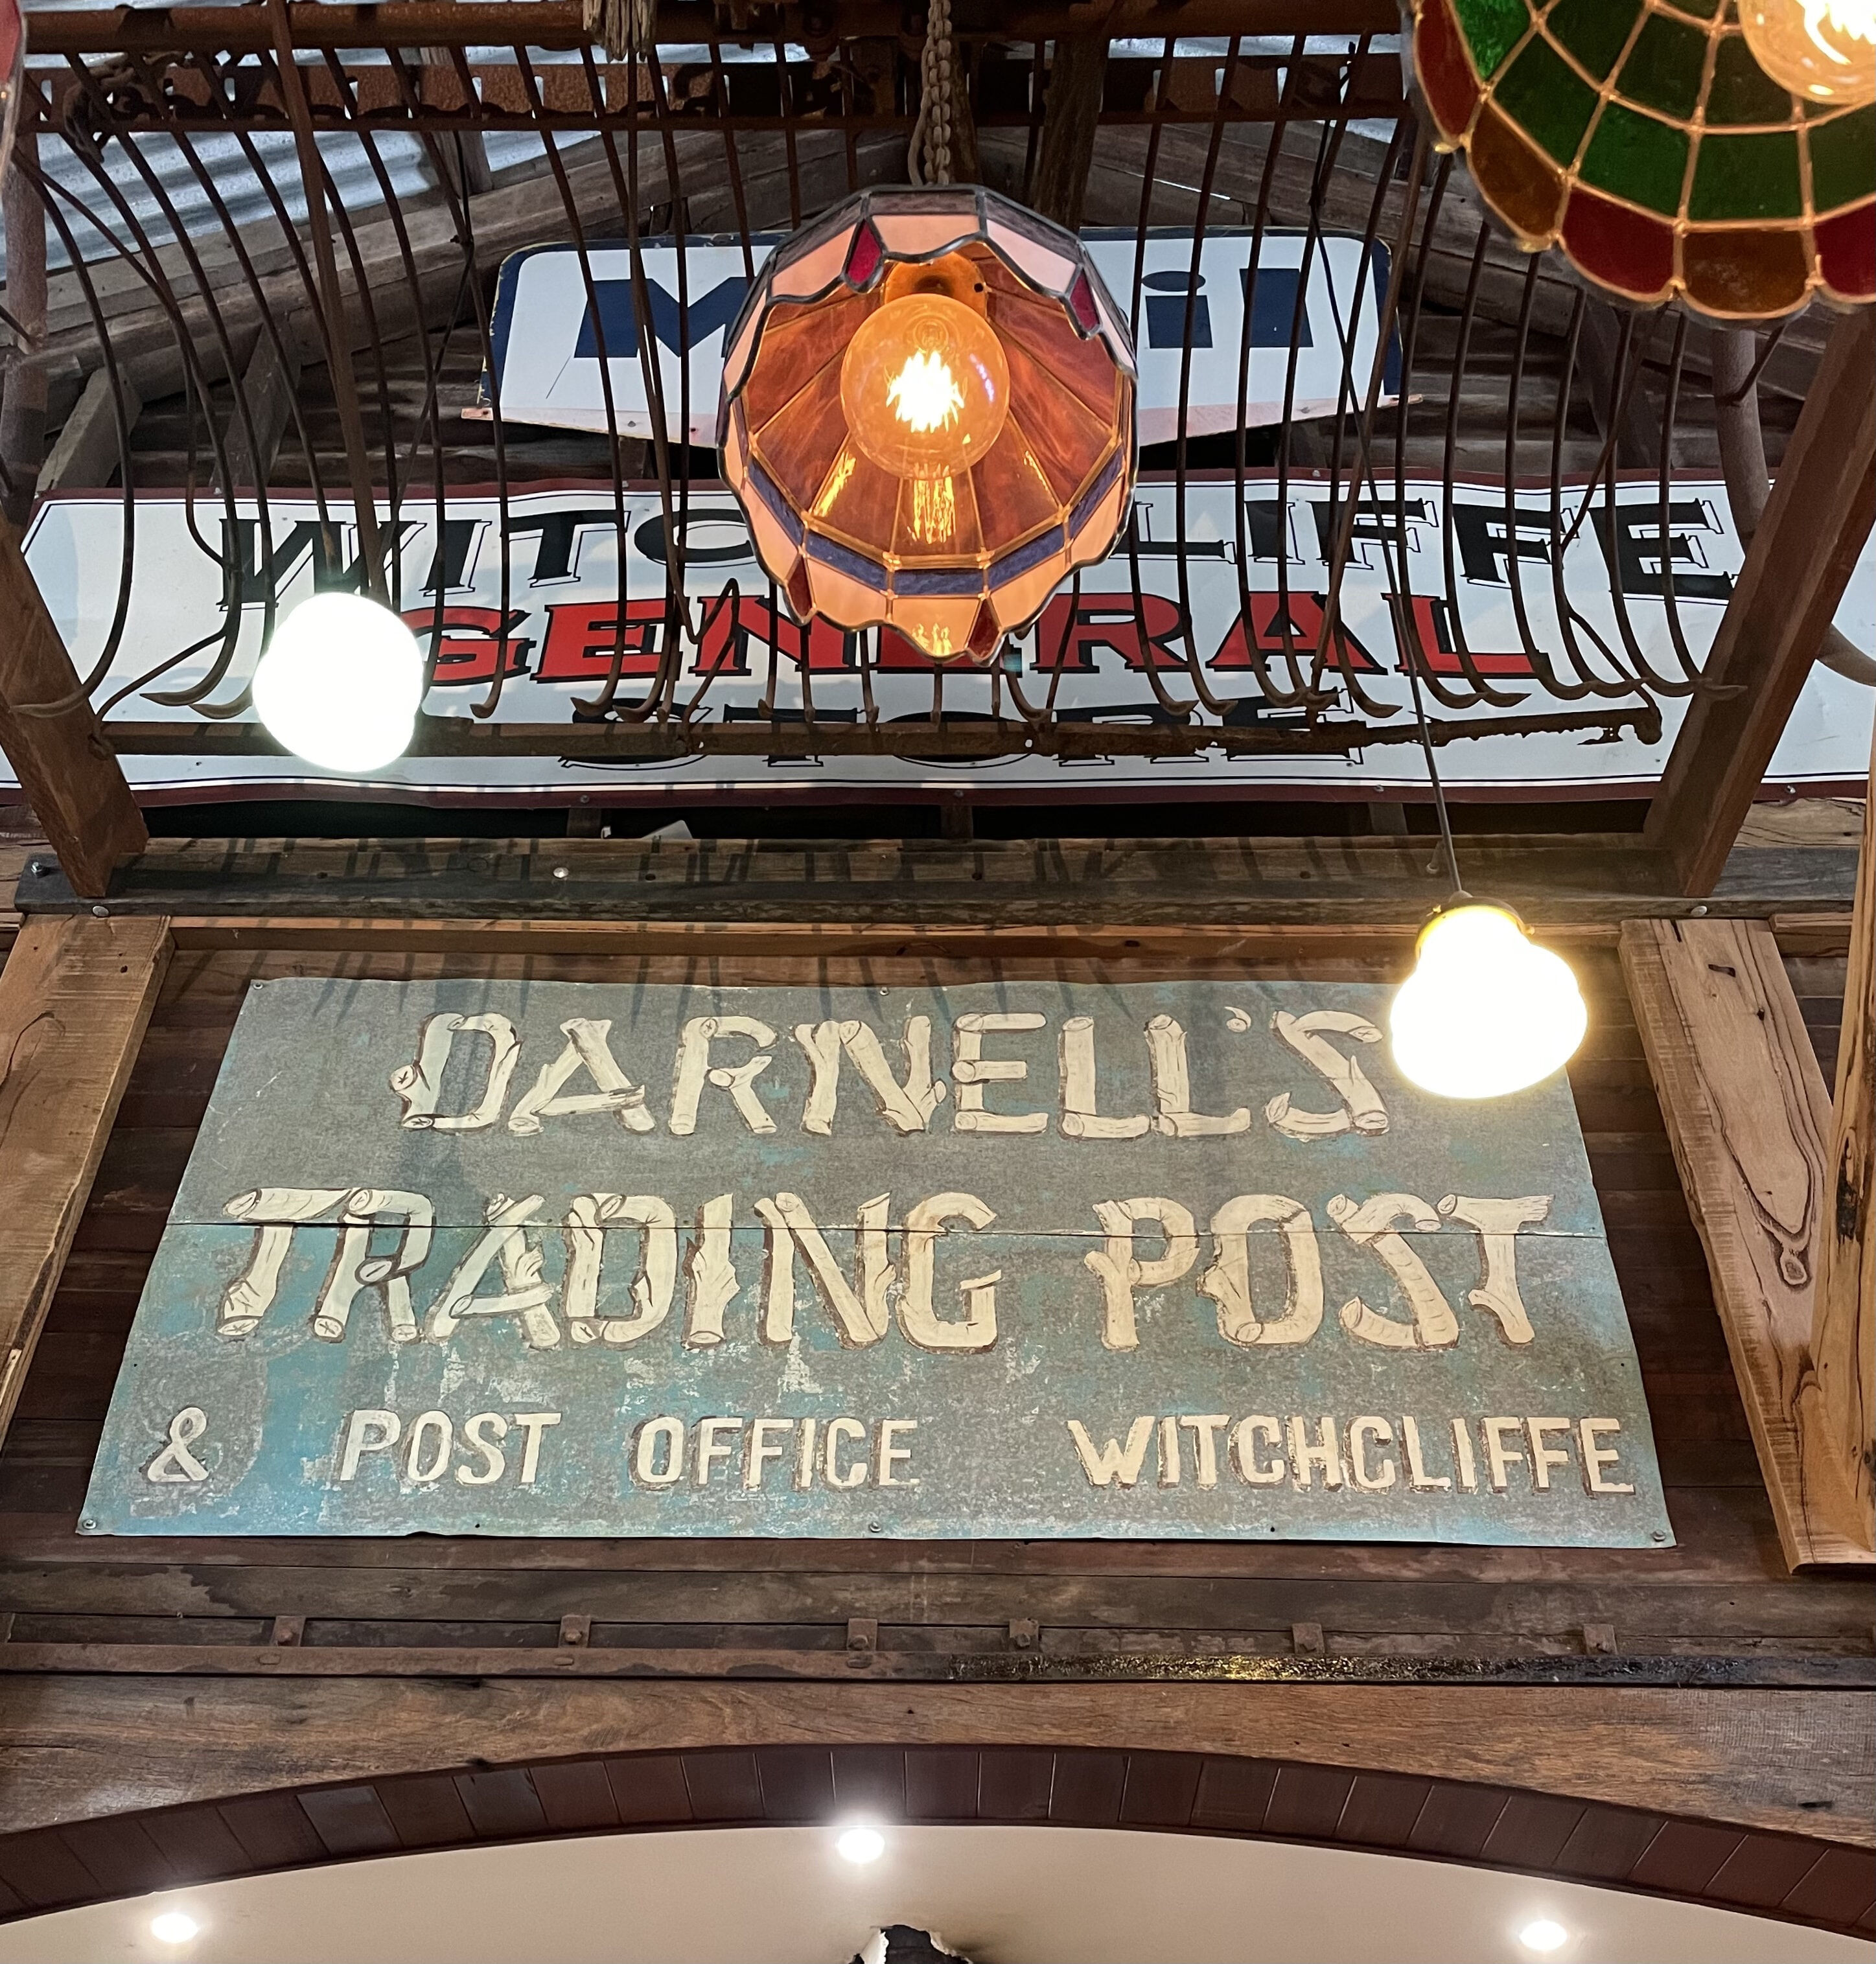 Darnell's trading post